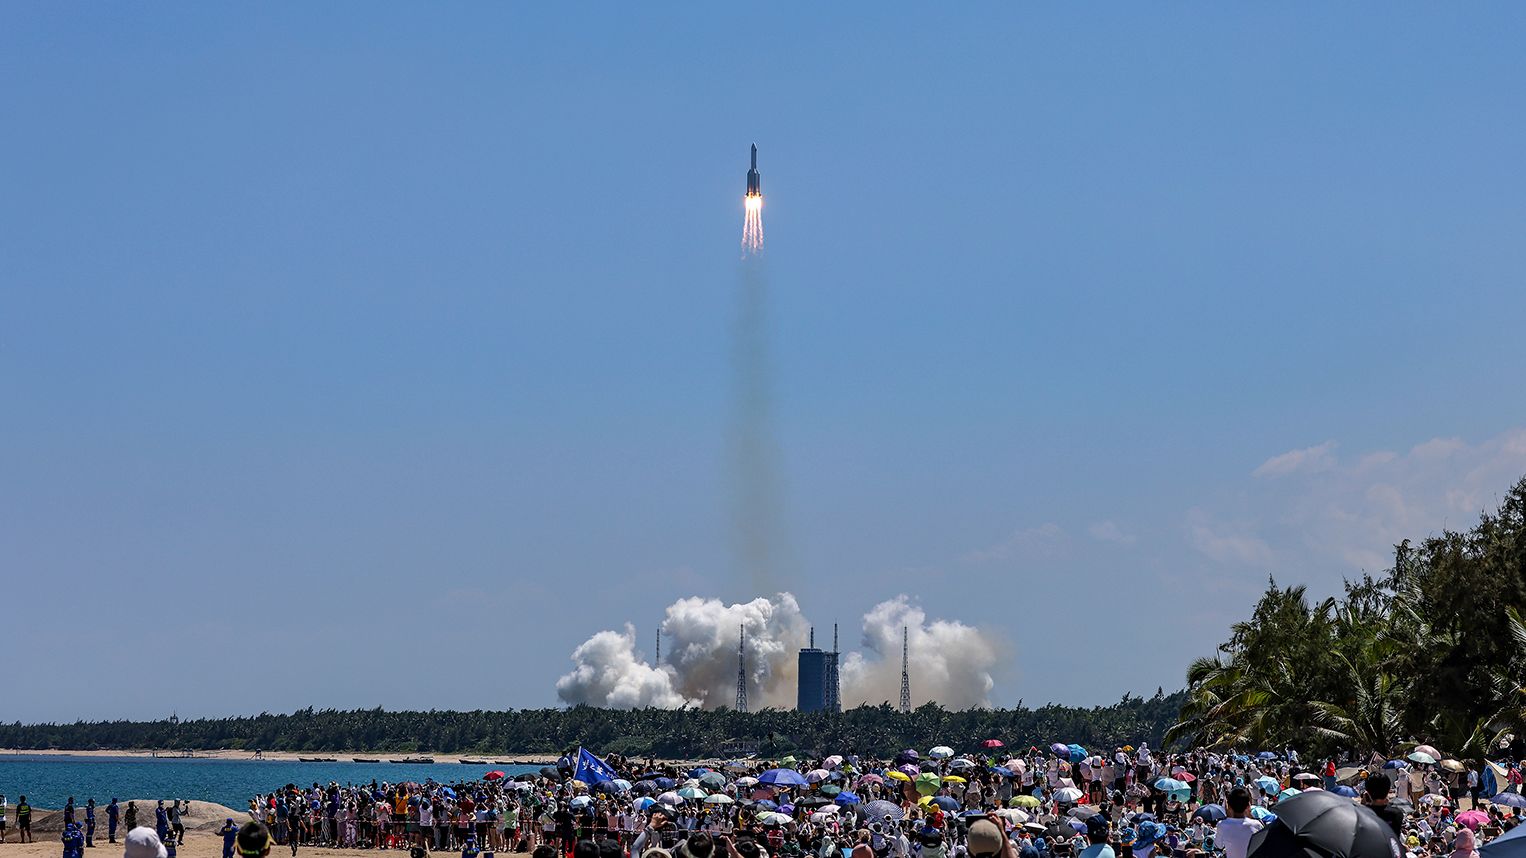 Large crowds of space enthusiasts watching watched China's launch of the Wentian lab module from tropical Hainan Island on a hot Sunday afternoon.